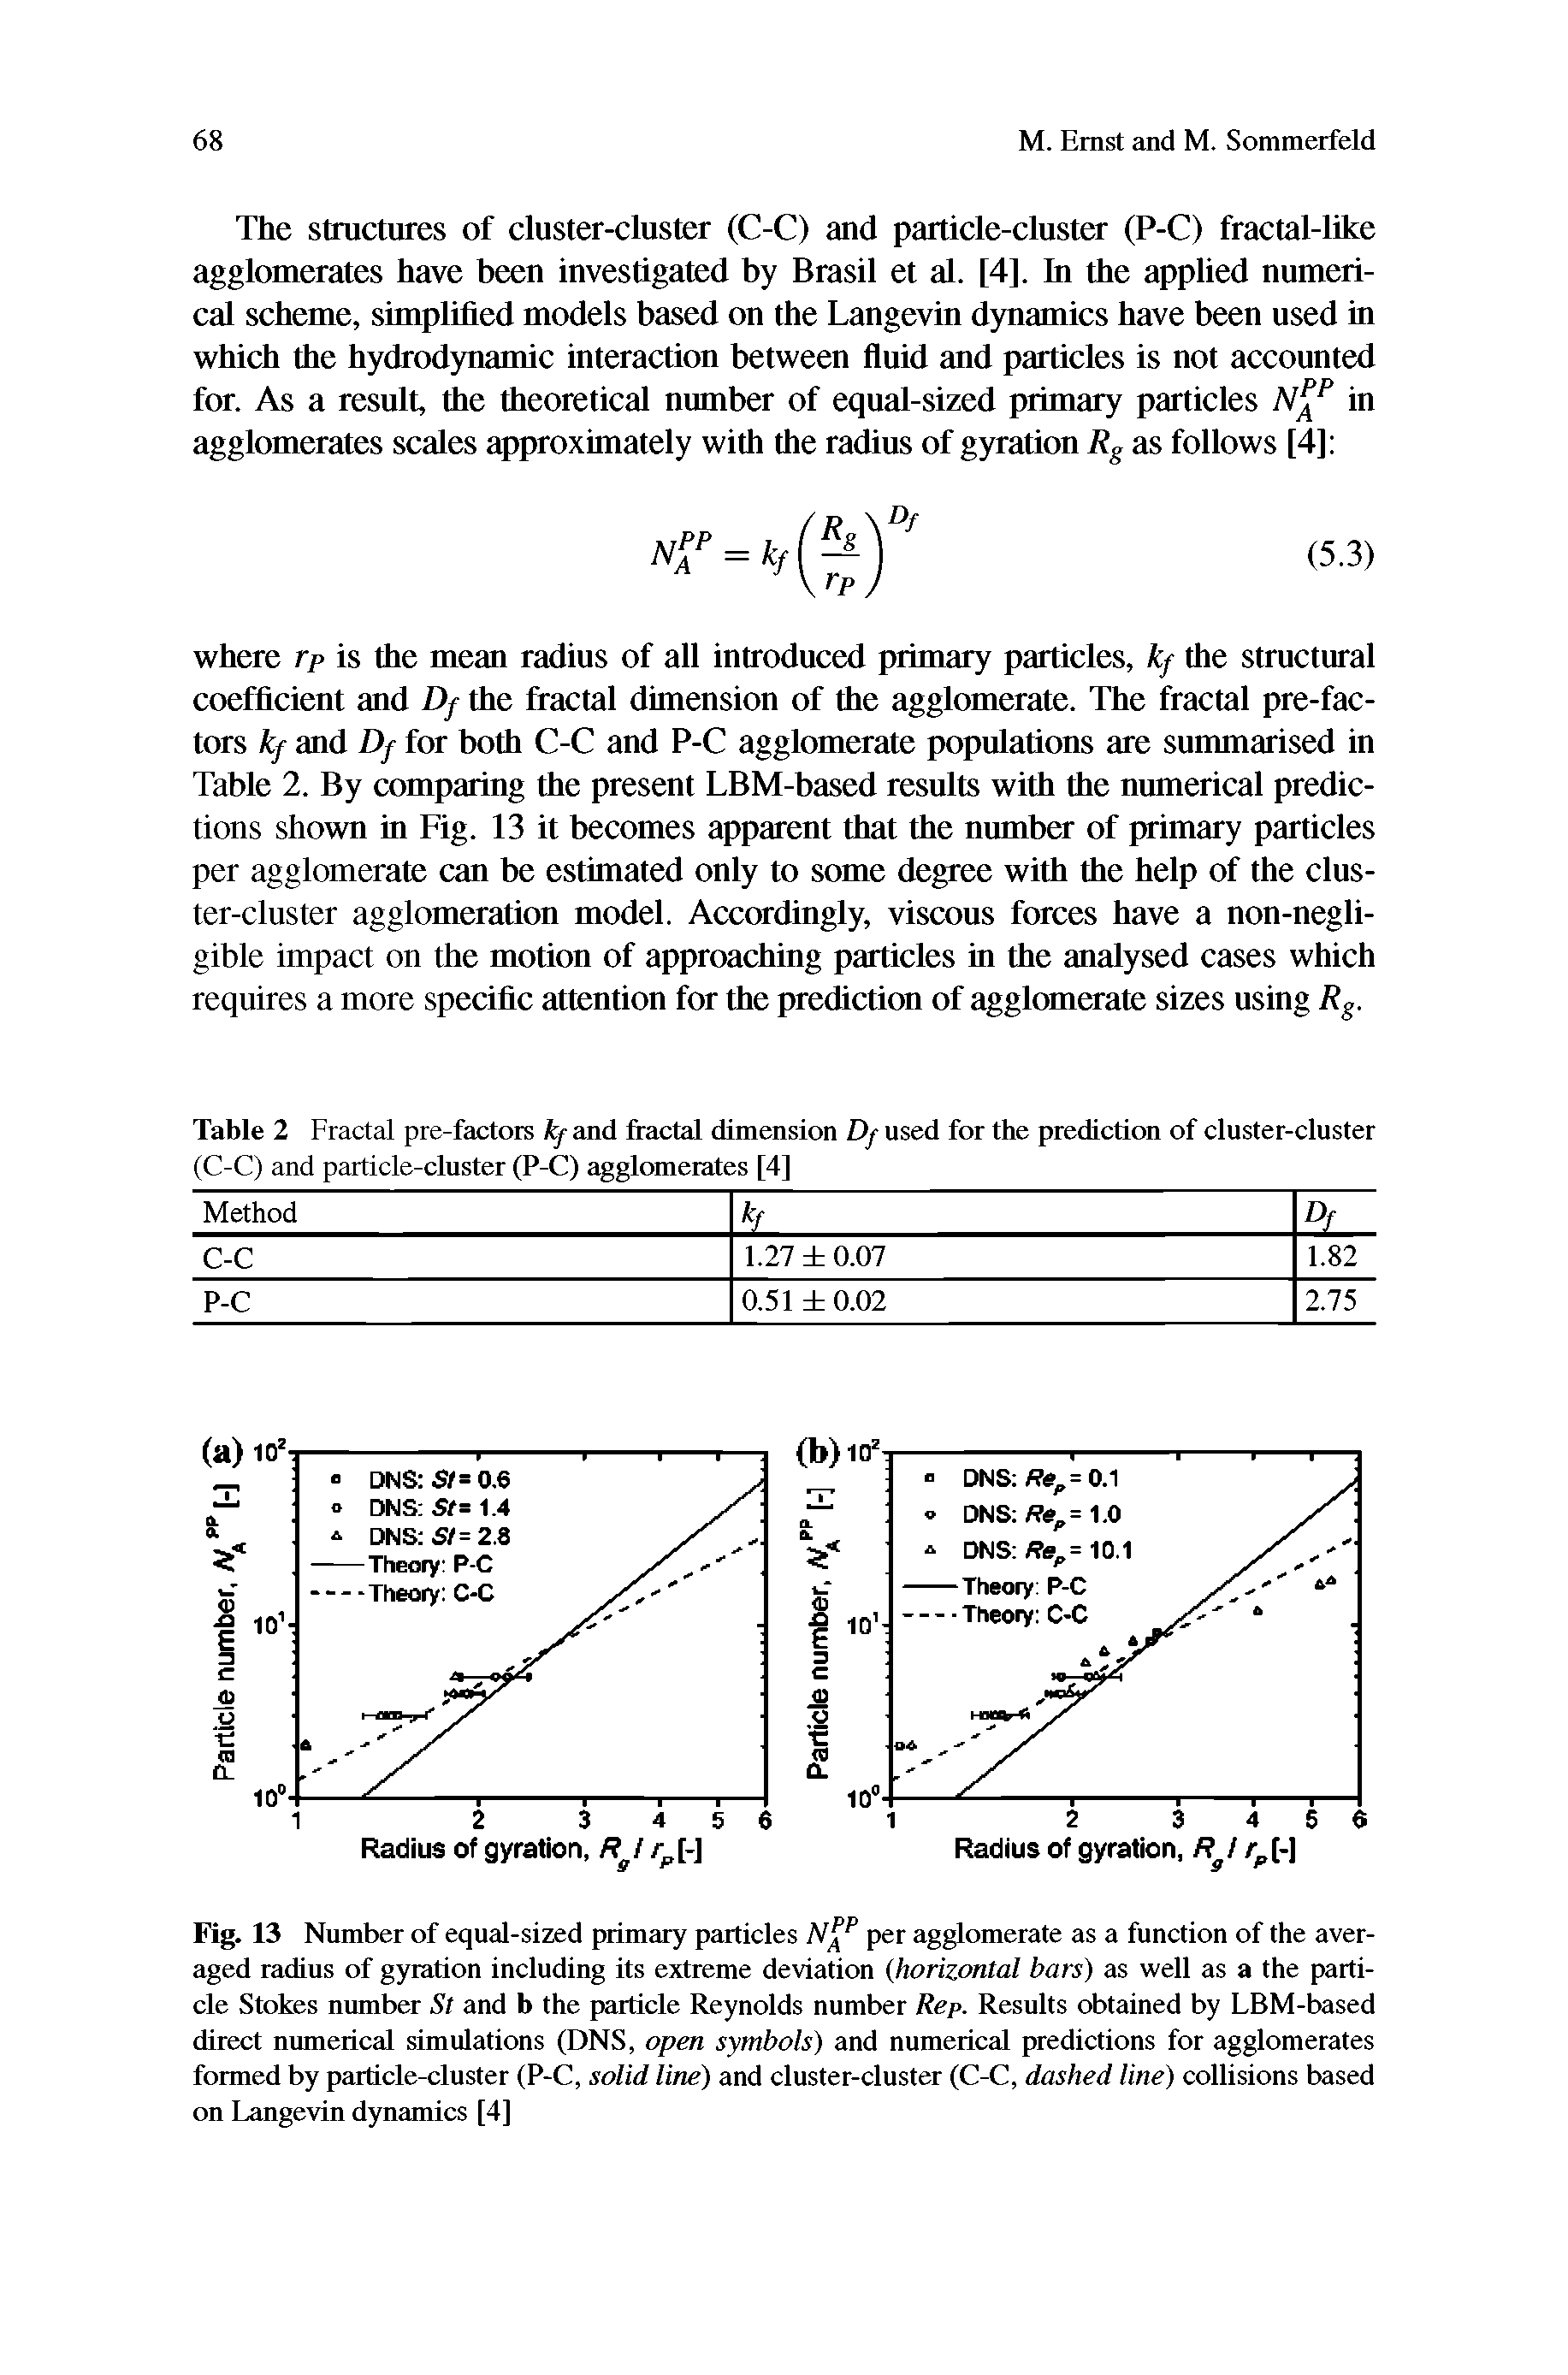 Fig. 13 Number of equal-sized primary particles per agglomerate as a function of the averaged radius of gyration including its extreme deviation (horizontal bars) as well as a the particle Stokes number St and b the particle Reynolds number Rep. Results obtained by LBM-based direct numerical simulations (DNS, open symbols) and numerical predictions for agglomerates formed by particle-cluster (P-C, solid line) and cluster-cluster (C-C, dashed line) collisions based on Langevin dynamics [4]...